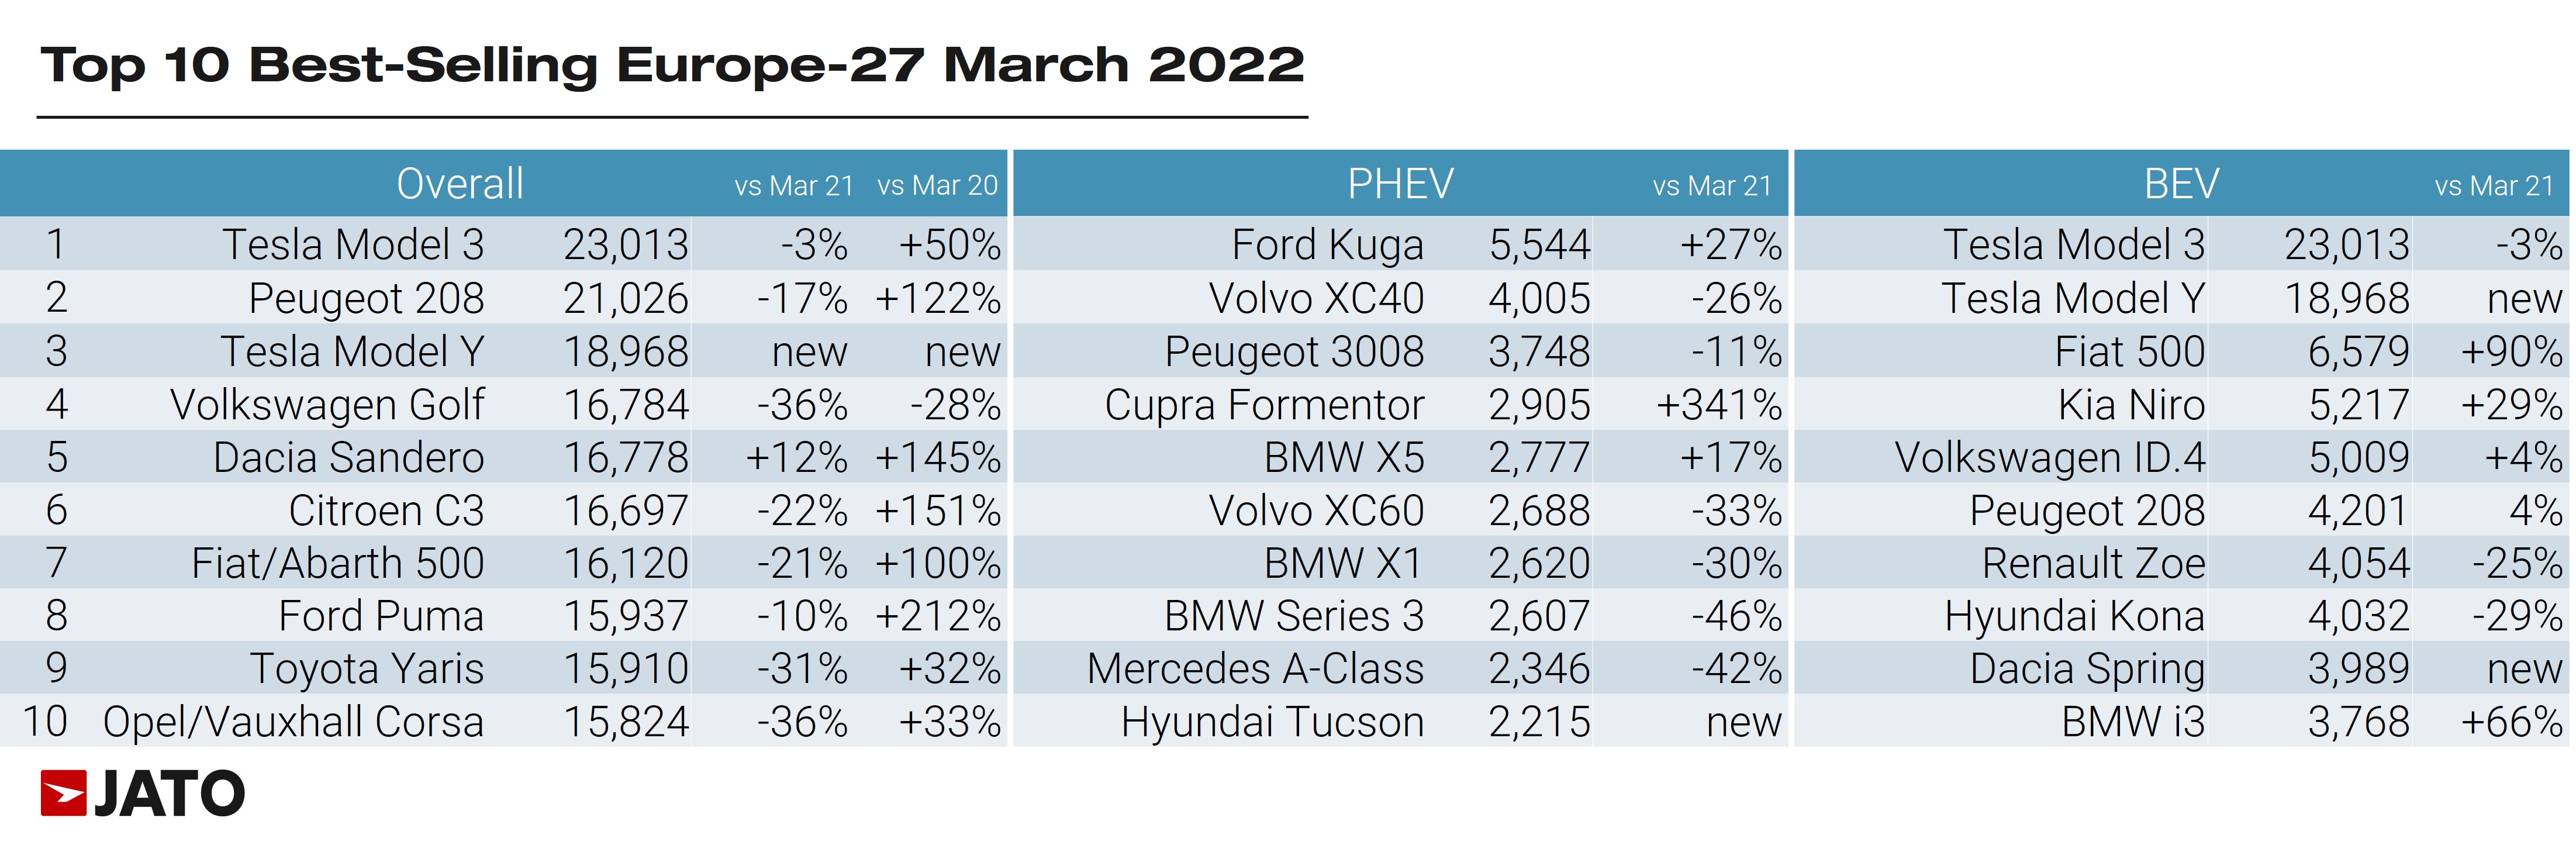 top 10 bestselling cars in europe march 2022